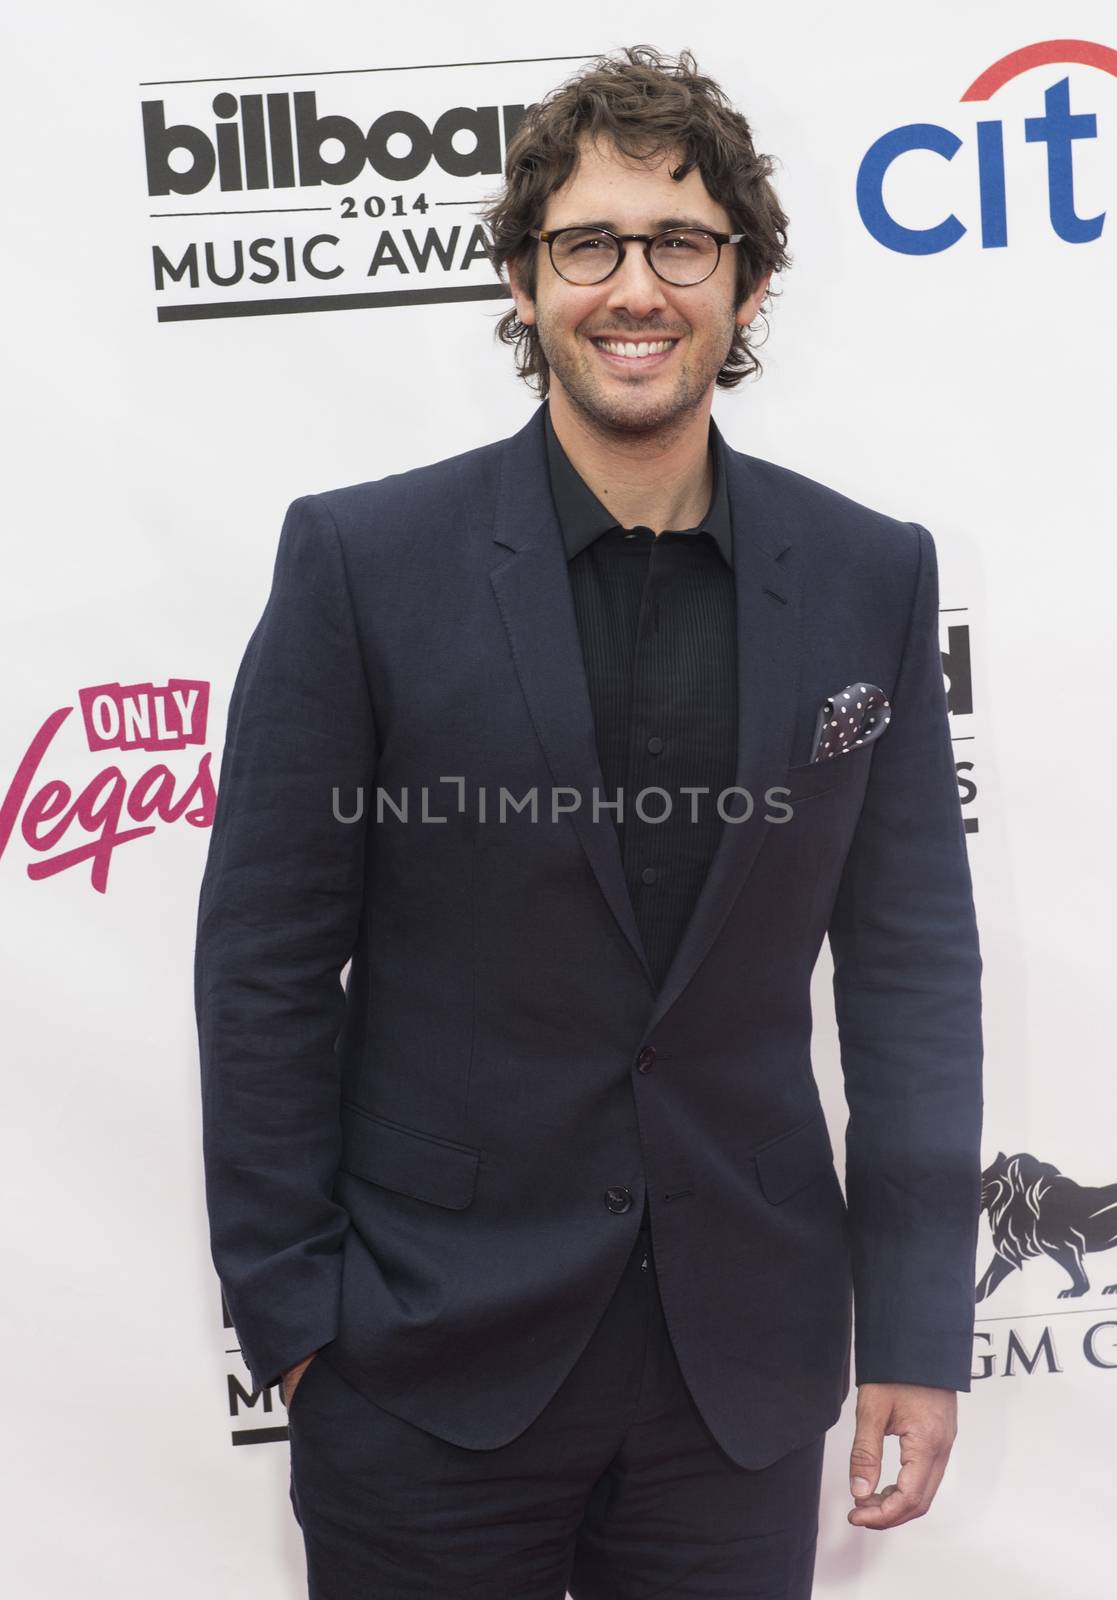 LAS VEGAS - MAY 18 : Singer/songwriter Josh Groban attend the 2014 Billboard Music Awards at the MGM Grand Garden Arena on May 18 , 2014 in Las Vegas.